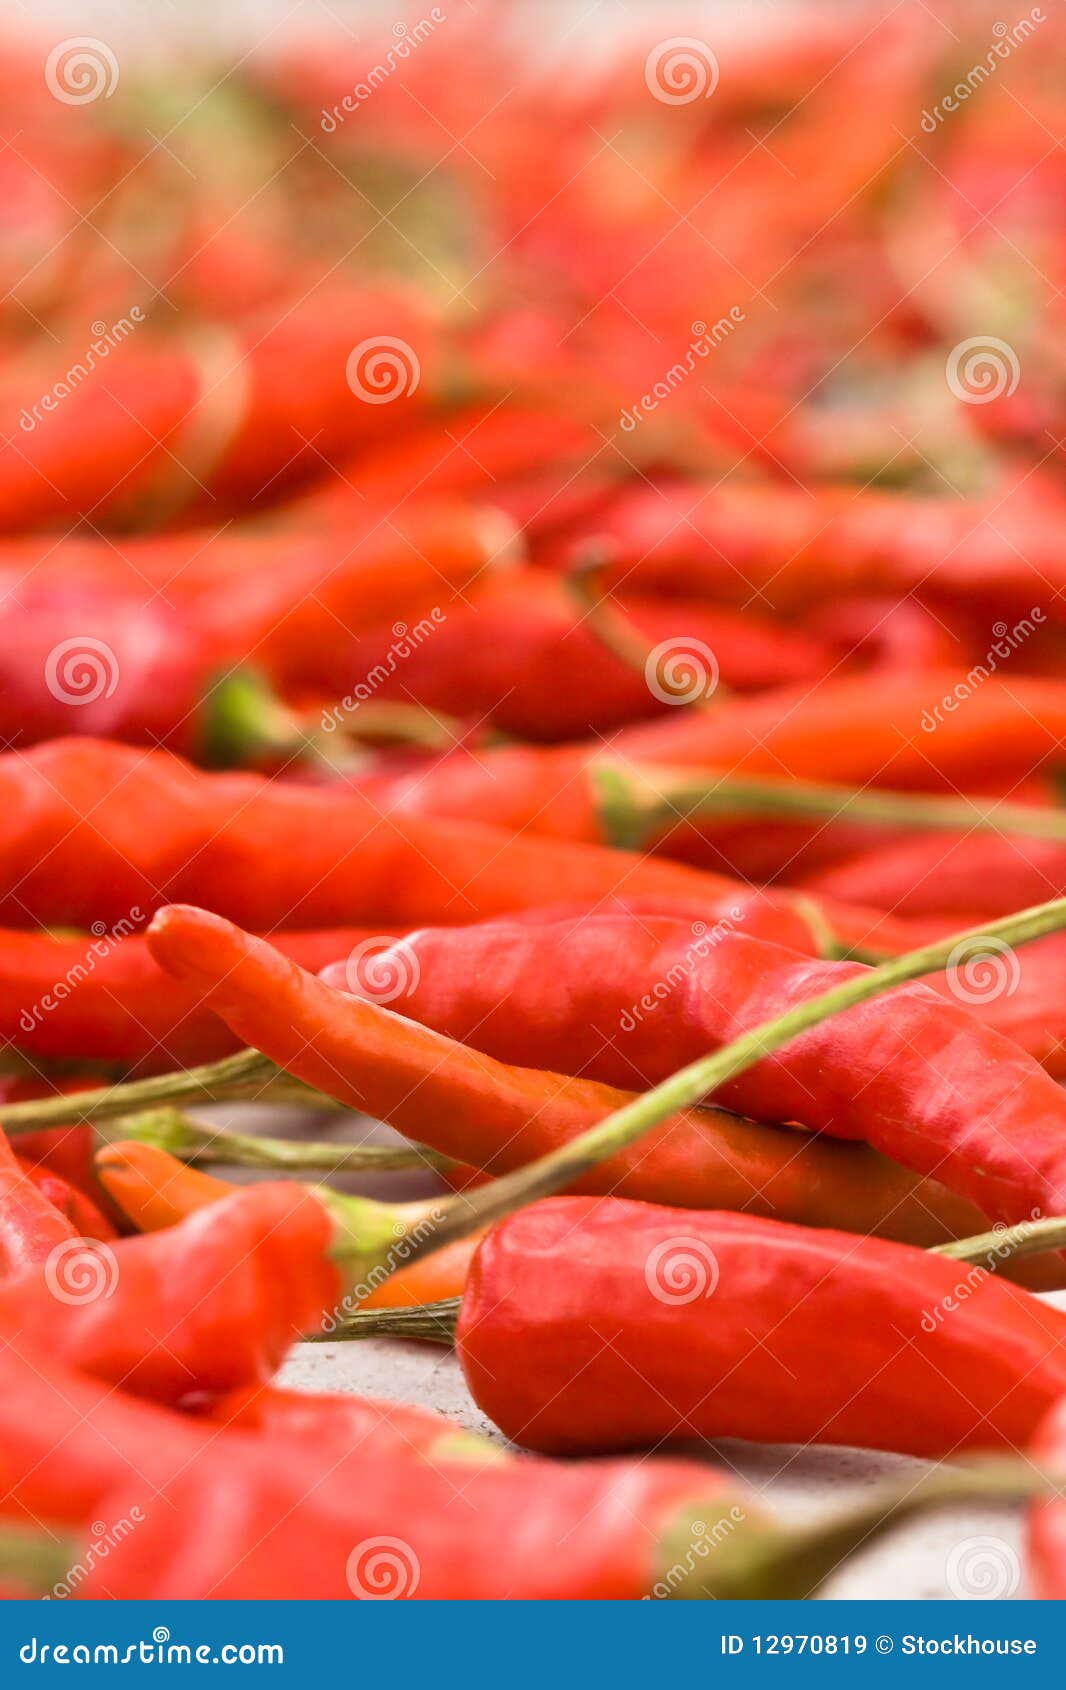 red peppers - shallow dof